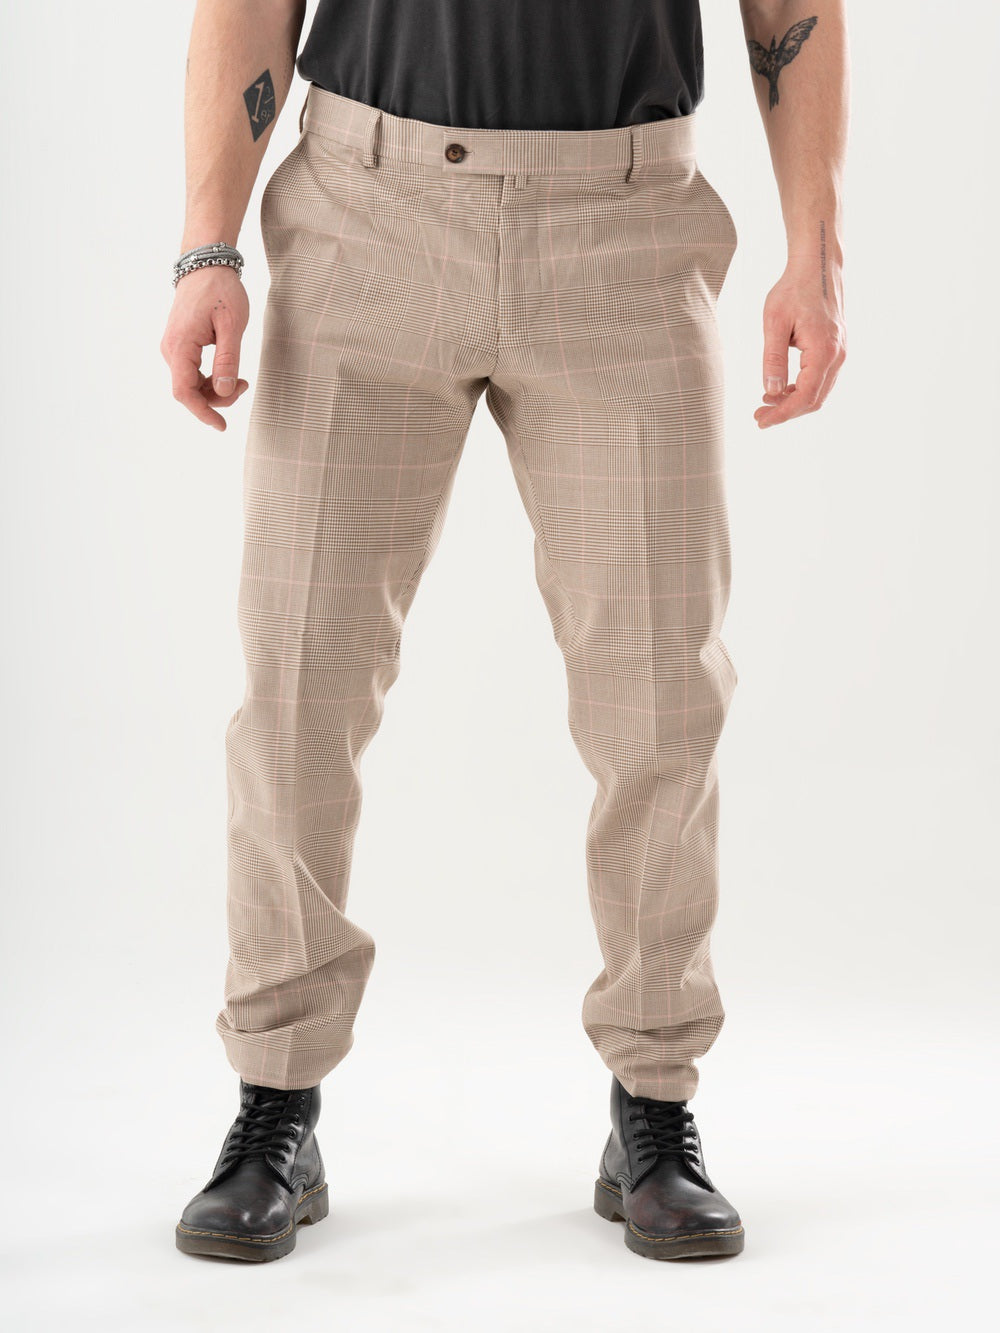 A man wearing MOONSHOT PANTS in a beige color.